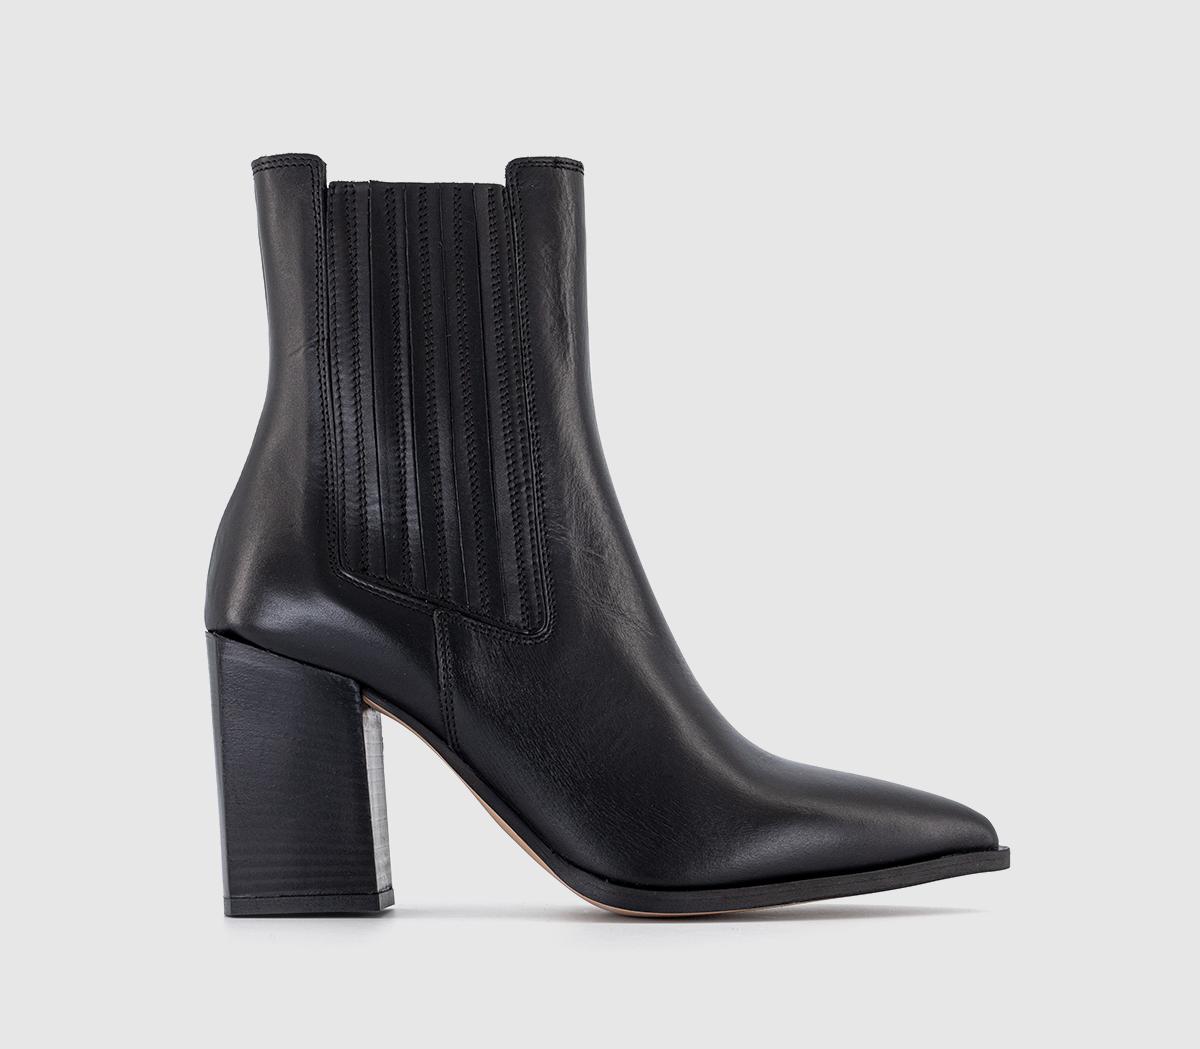 OFFICEAndine Covered Chelsea Western BootsBlack Leather